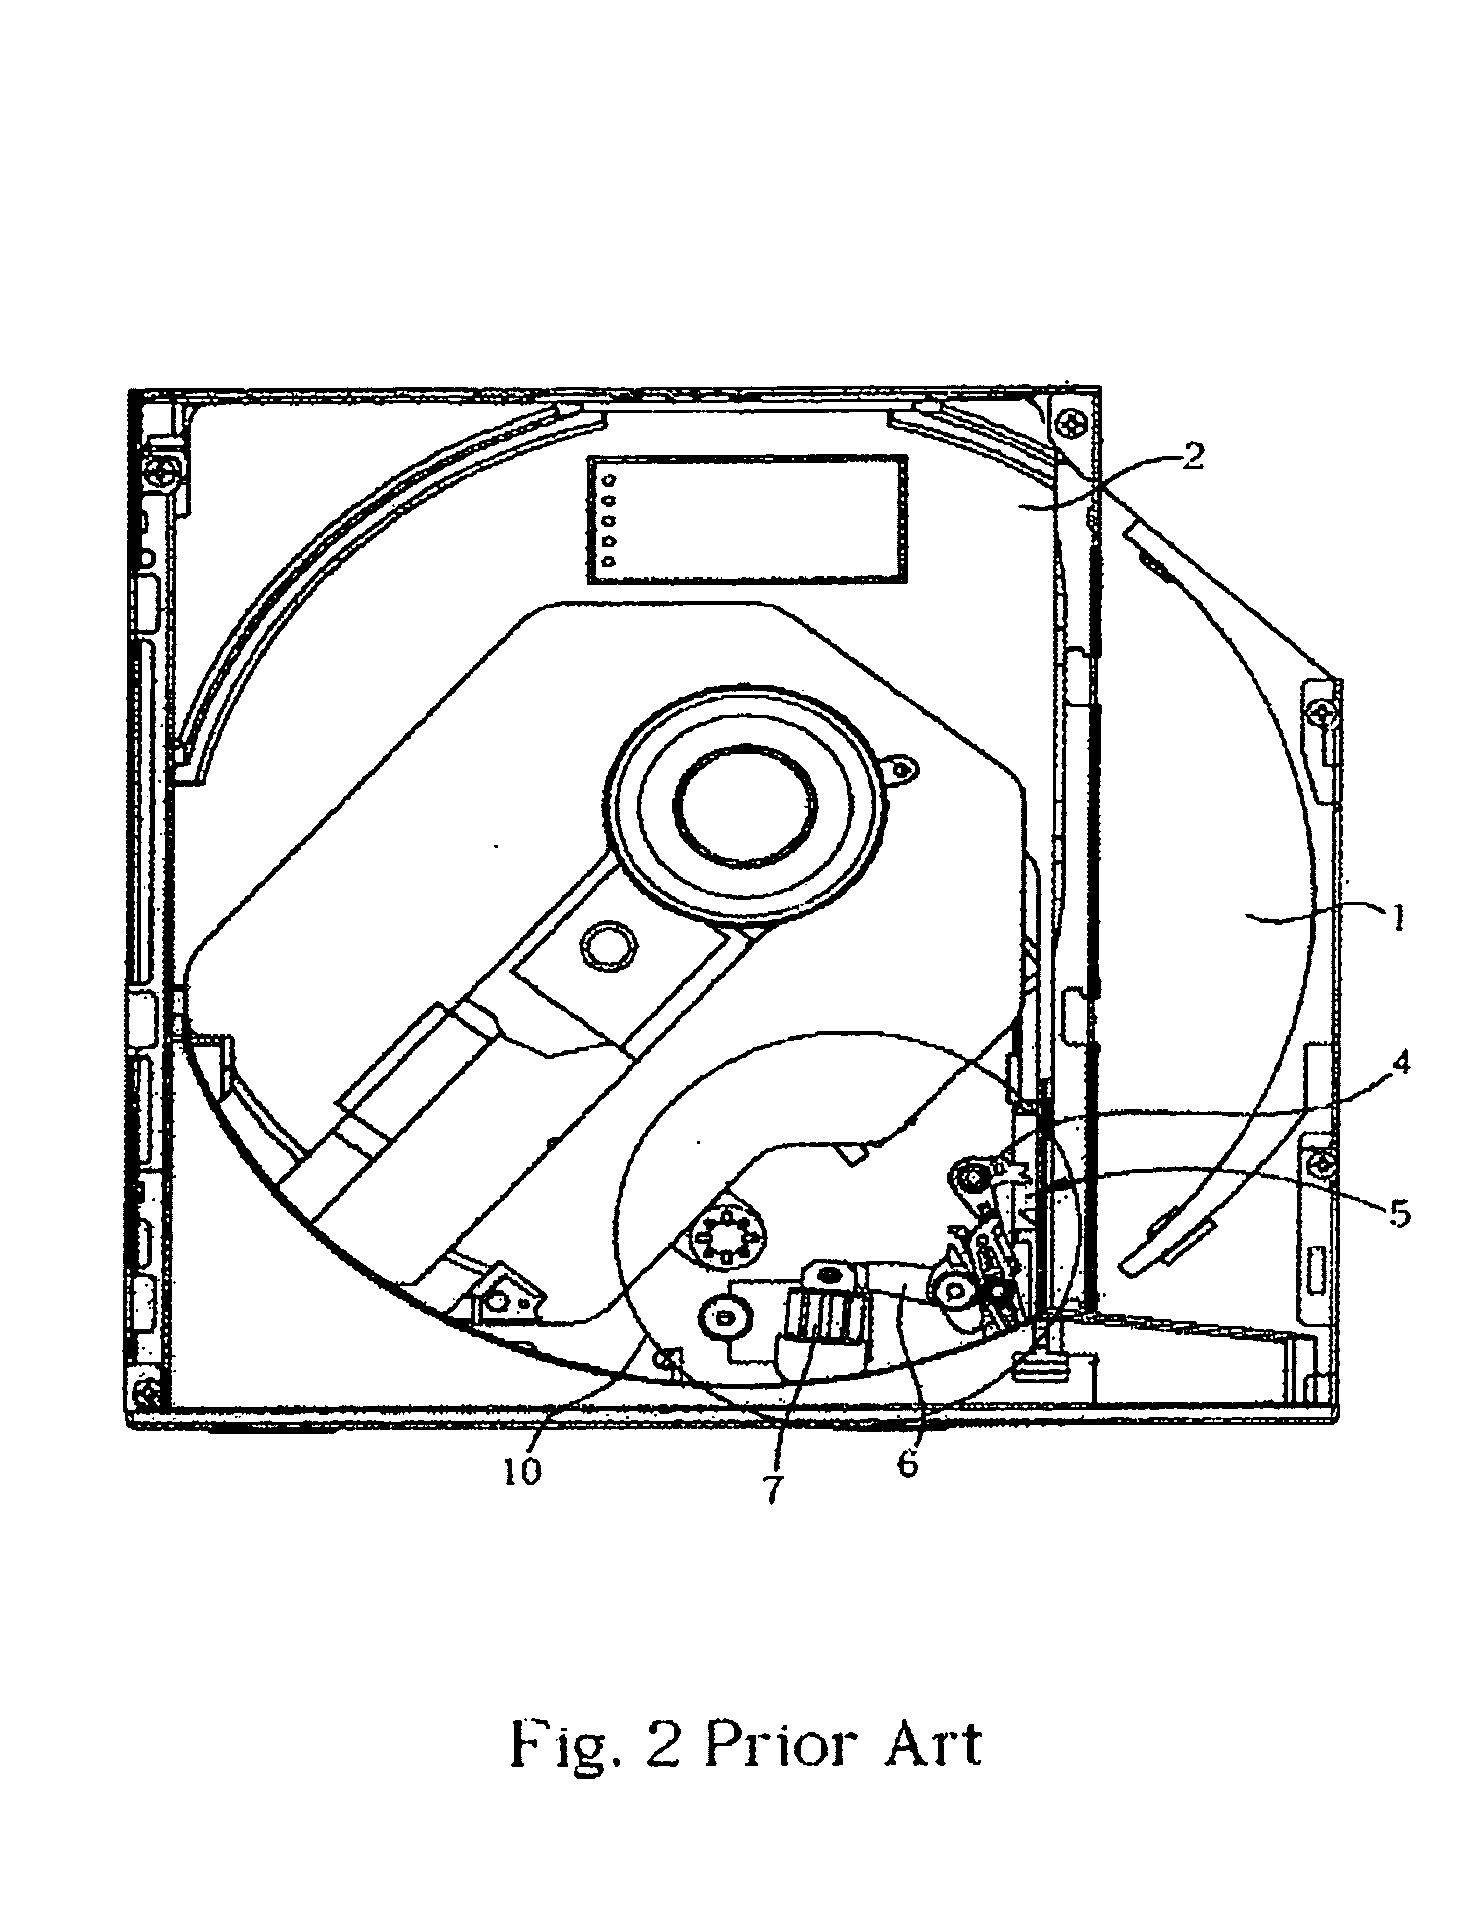 Tray locking mechanism used in an optical disk drive